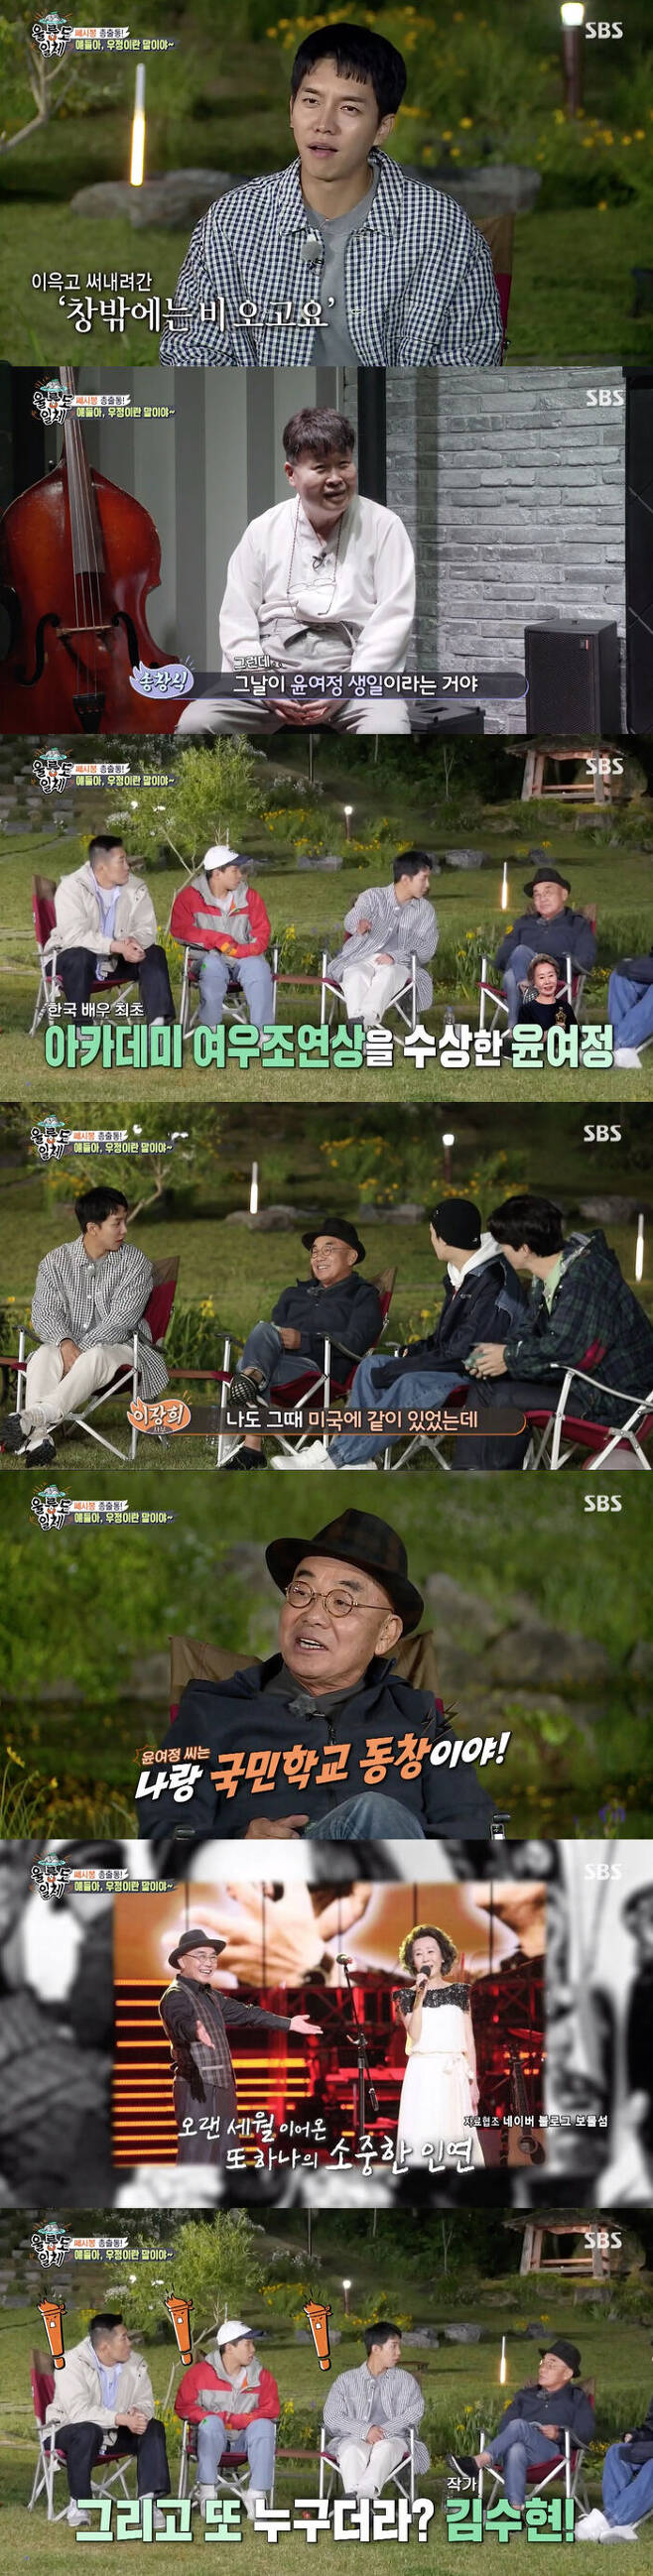 Yi Jang-hui has revealed her relationship with Friend Youn Yuh-jung.On SBS All The Butlers broadcast on the 20th, friends who are keeping a deep friendship with Master Yi Jang-hui appeared.On the show, Master Yi Jang-hui and his age-old steamy Song Chang-sik posted a video letter to him; Master Yi Jang-hui was as happy as a child to appear.Song Chang-sik talked about memories of Yi Jang-hui and released the story of his first lyrics to his song.Yi Jang-hui, who wrote the song Outside the Window, Rainy Ogo.So Song Chang-sik said, The Cecibong family went fishing together, and there was Youn Yuh-jung. But that was his birthday.So the song became a birthday celebration, and it was the first time someone had called it in front of me. At this time, Lee Seung-gi asked about his feelings about the Academy Award for Best Supporting Actress of Youn Yuh-jung, which is a deep relationship with Yi Jang-hui.Yi Jang-hui said, At that time, I was with United States of America. Youn Yuh-jung is a alumni of elementary school with me.He also said, And the playwright Kim Soo-hyun met a lot like that.The members were surprised that there are only stars around, and Lee Seung-gi asked which elemental school was.When I told him which school, he said, I have to send the child there, and Lee Seung-gi said, I have to go back in.